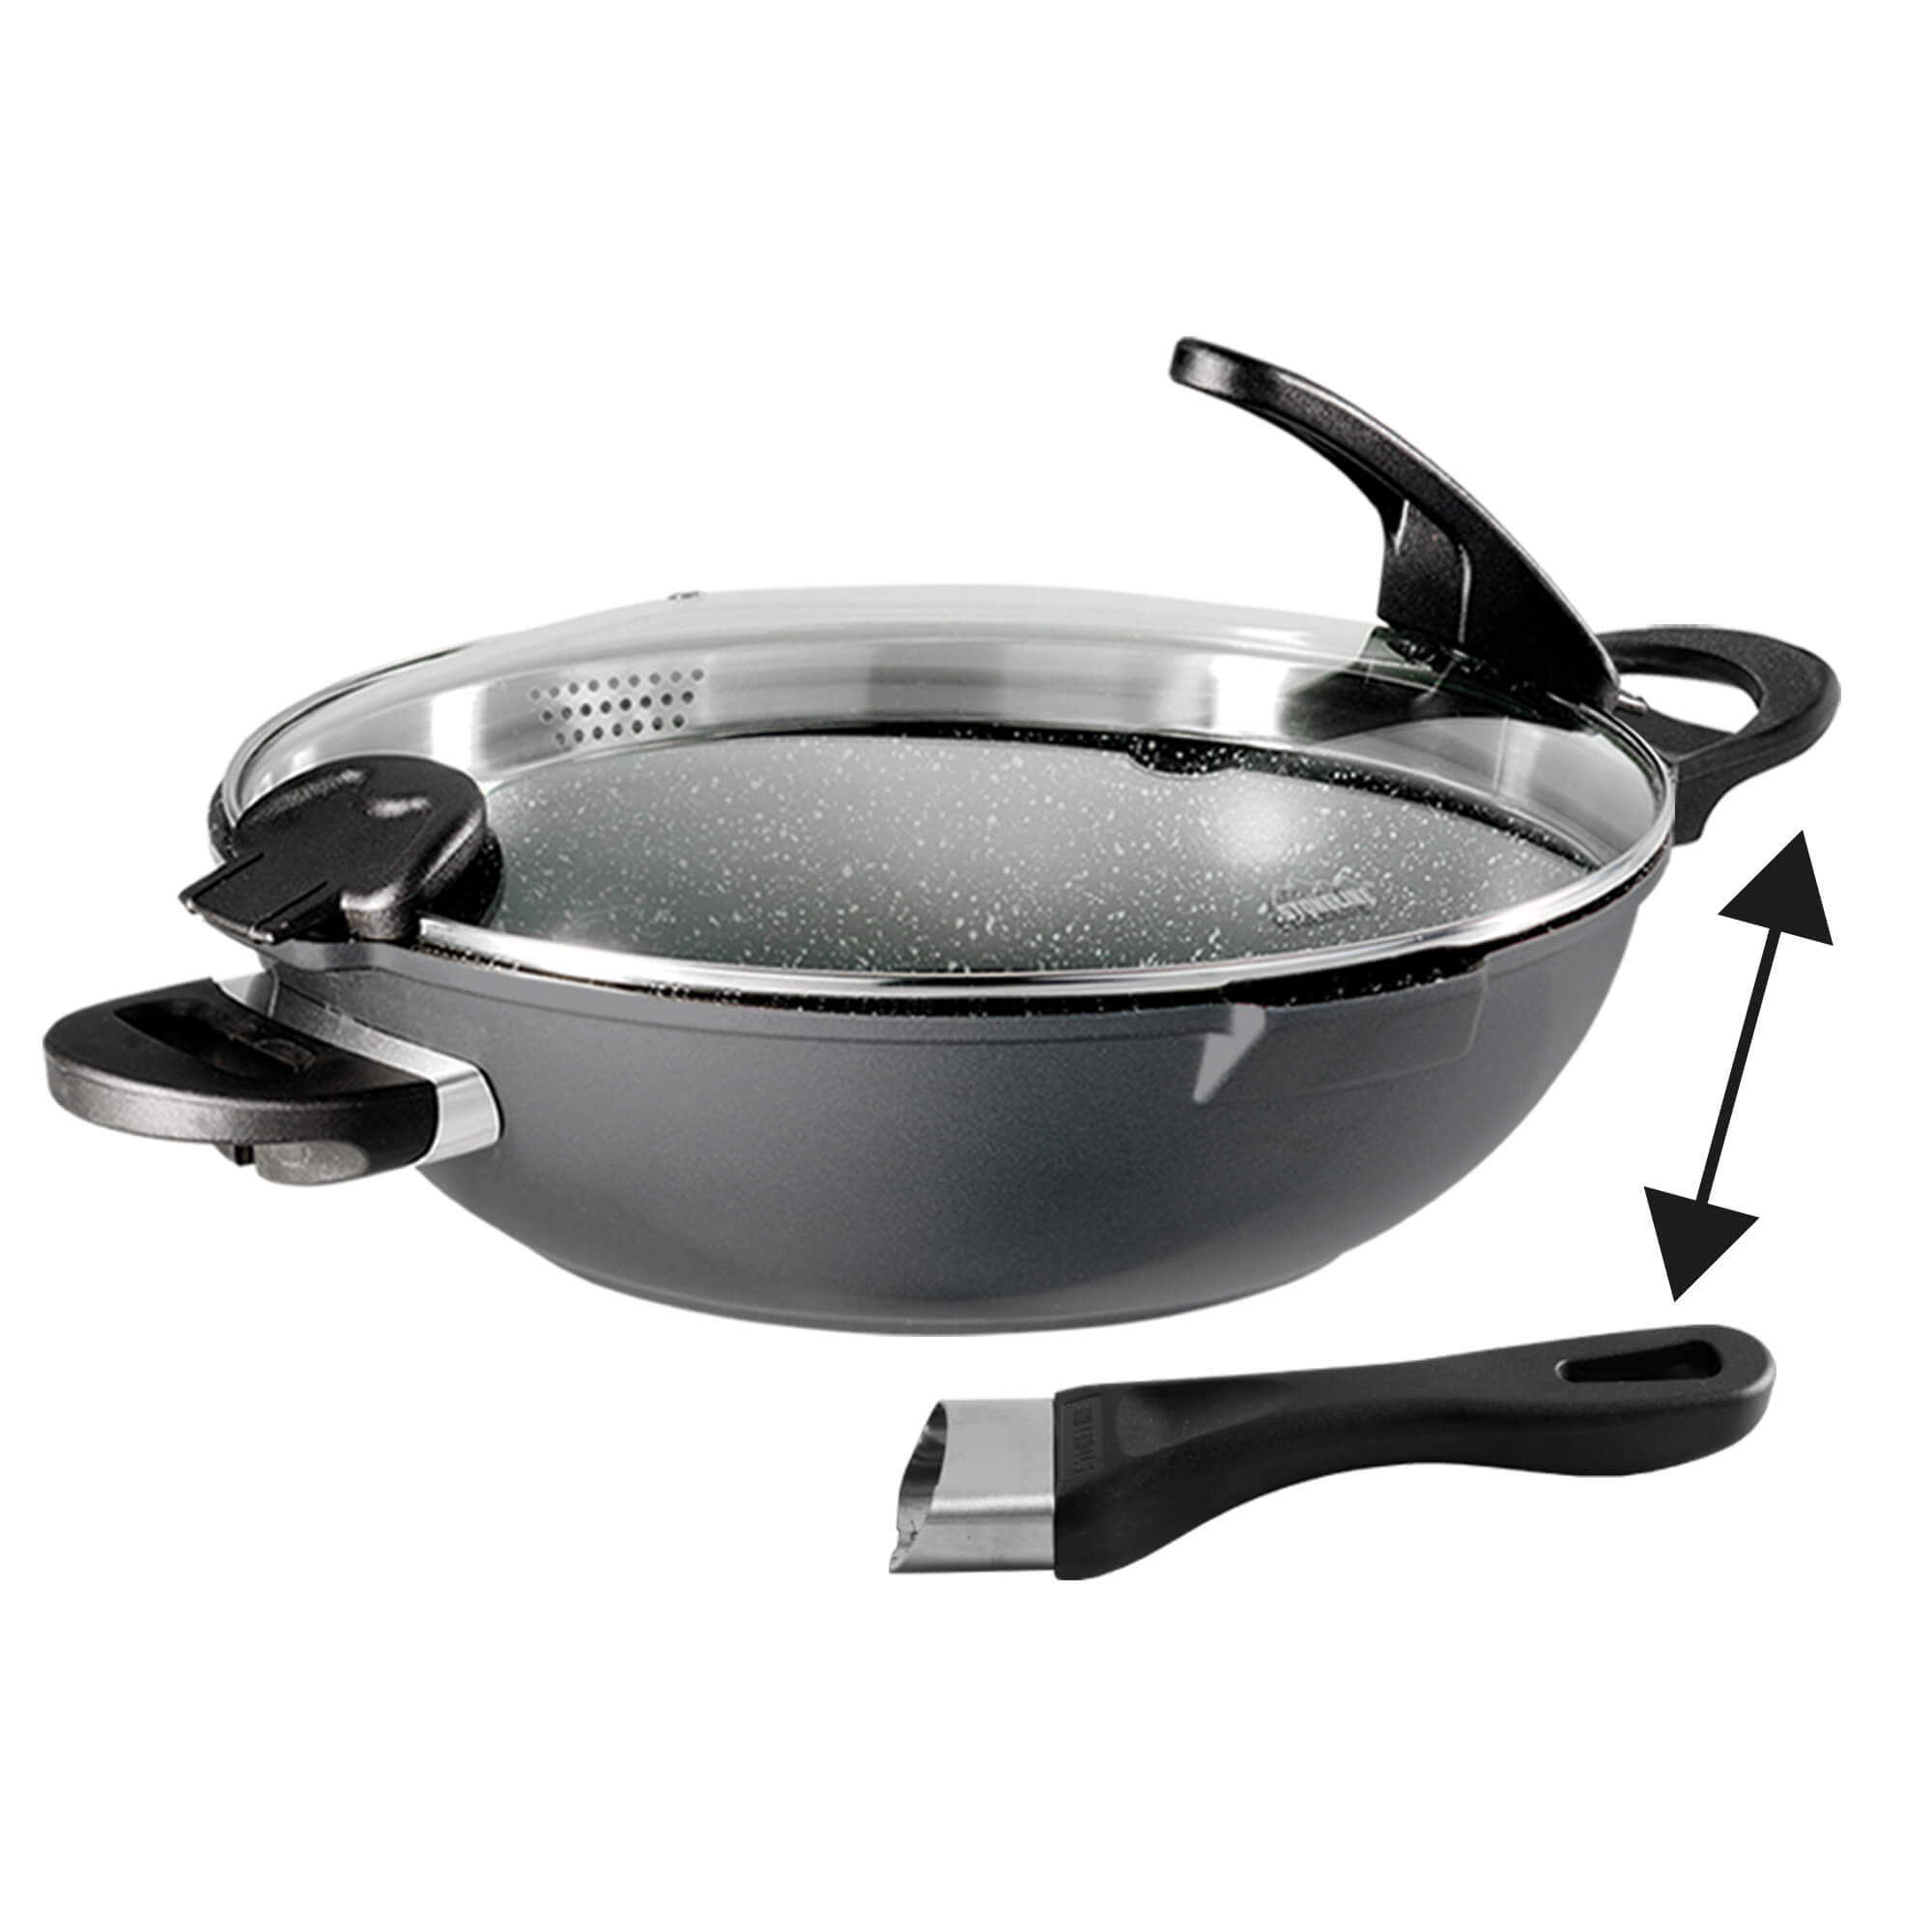 FUTURE Wok 32 cm with exchangeable handles and Sieve Glass Lid - Non Stick  Kitchenware